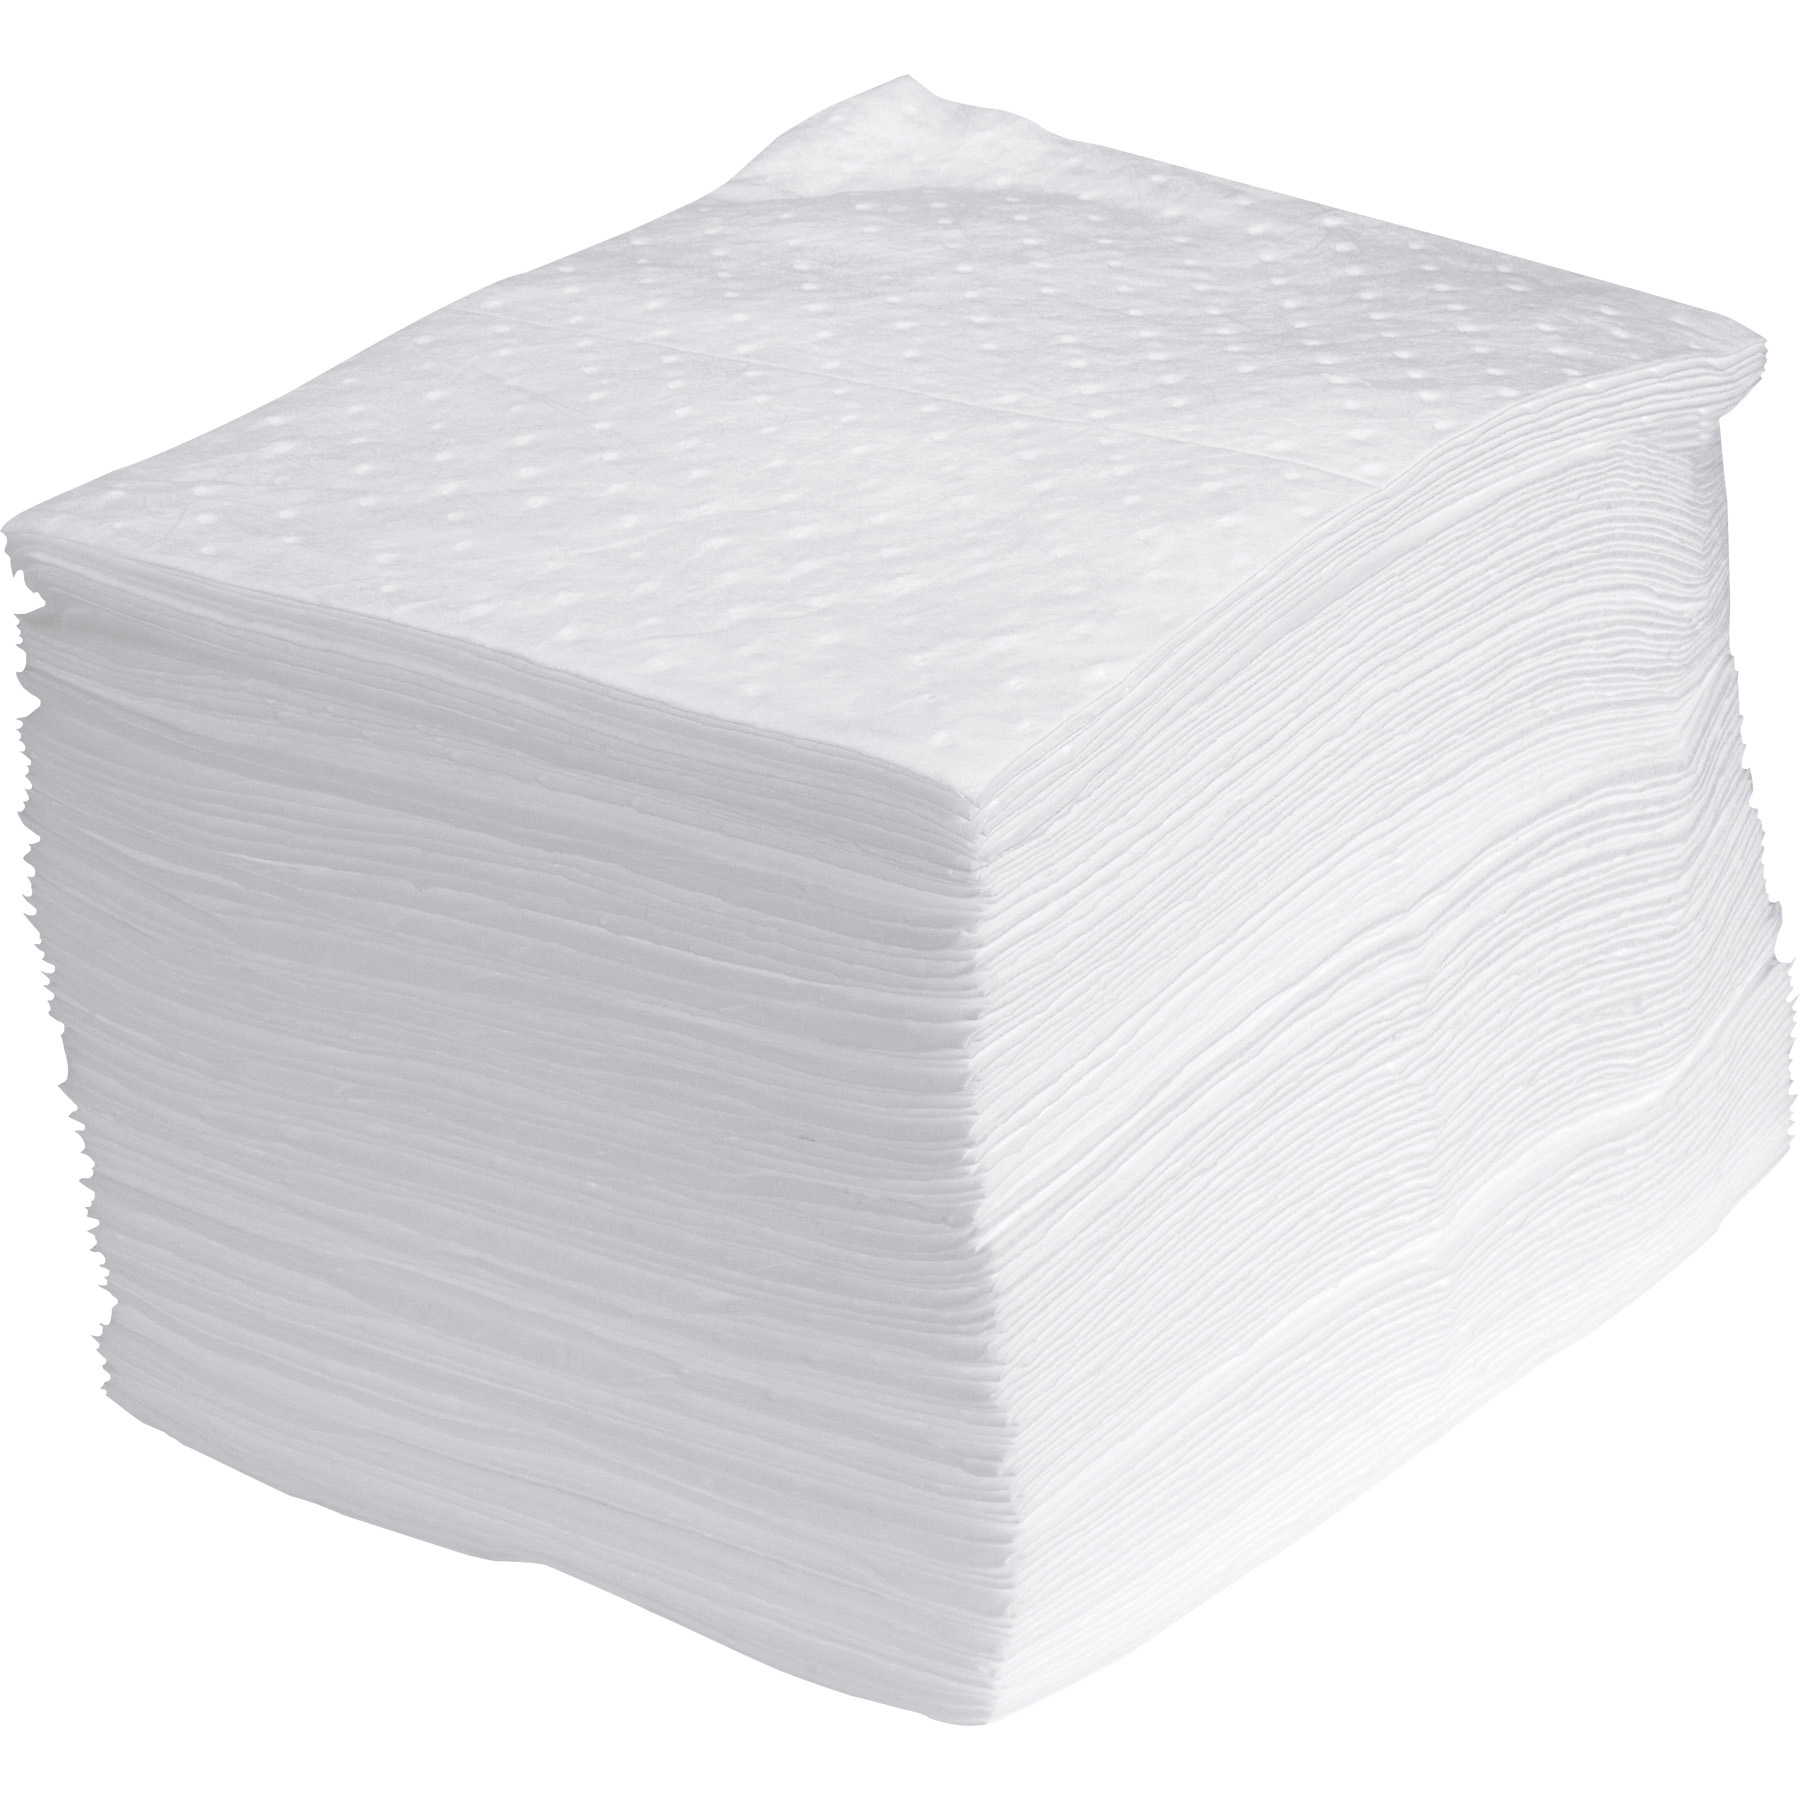 15" x 18" Medium-Weight Oil Absorbent Pads, Sonic Bonded, White (100 pads/bag)